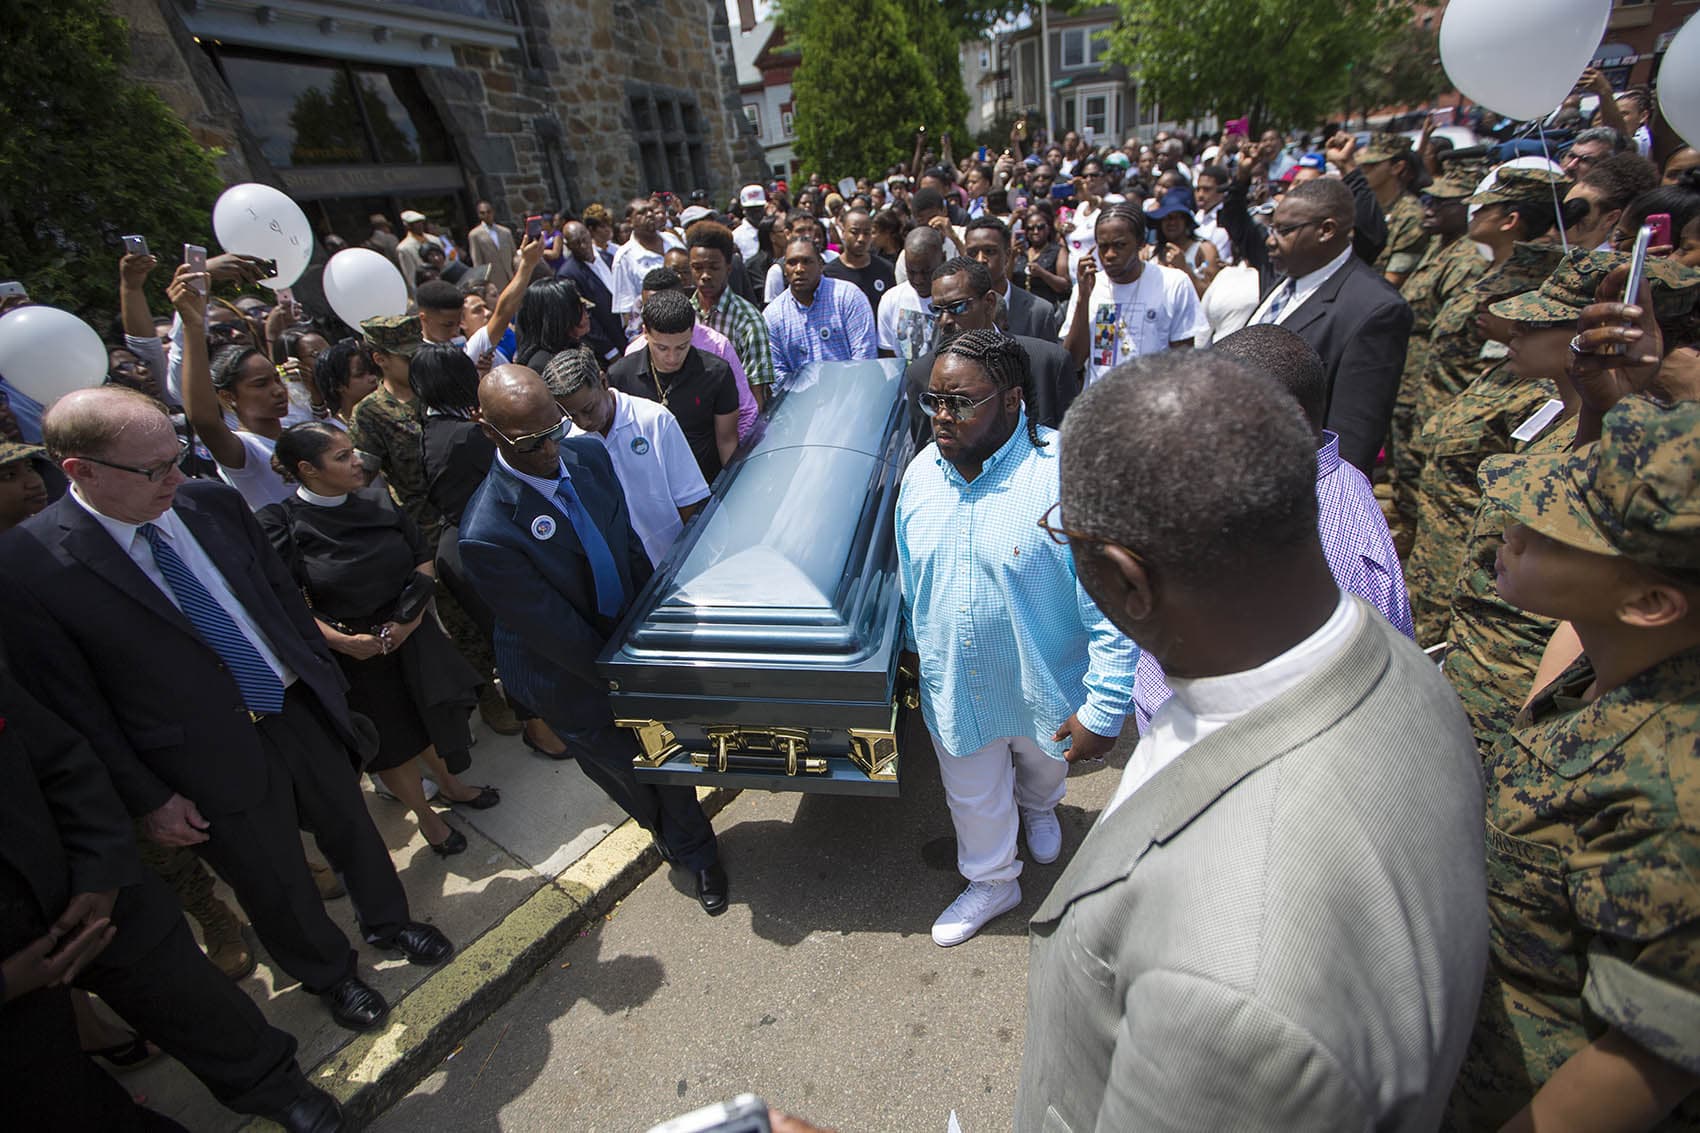 Pallbearers carry the casket of Raekwon Brown out of the Charles Street AME Church. (Jesse Costa/WBUR)